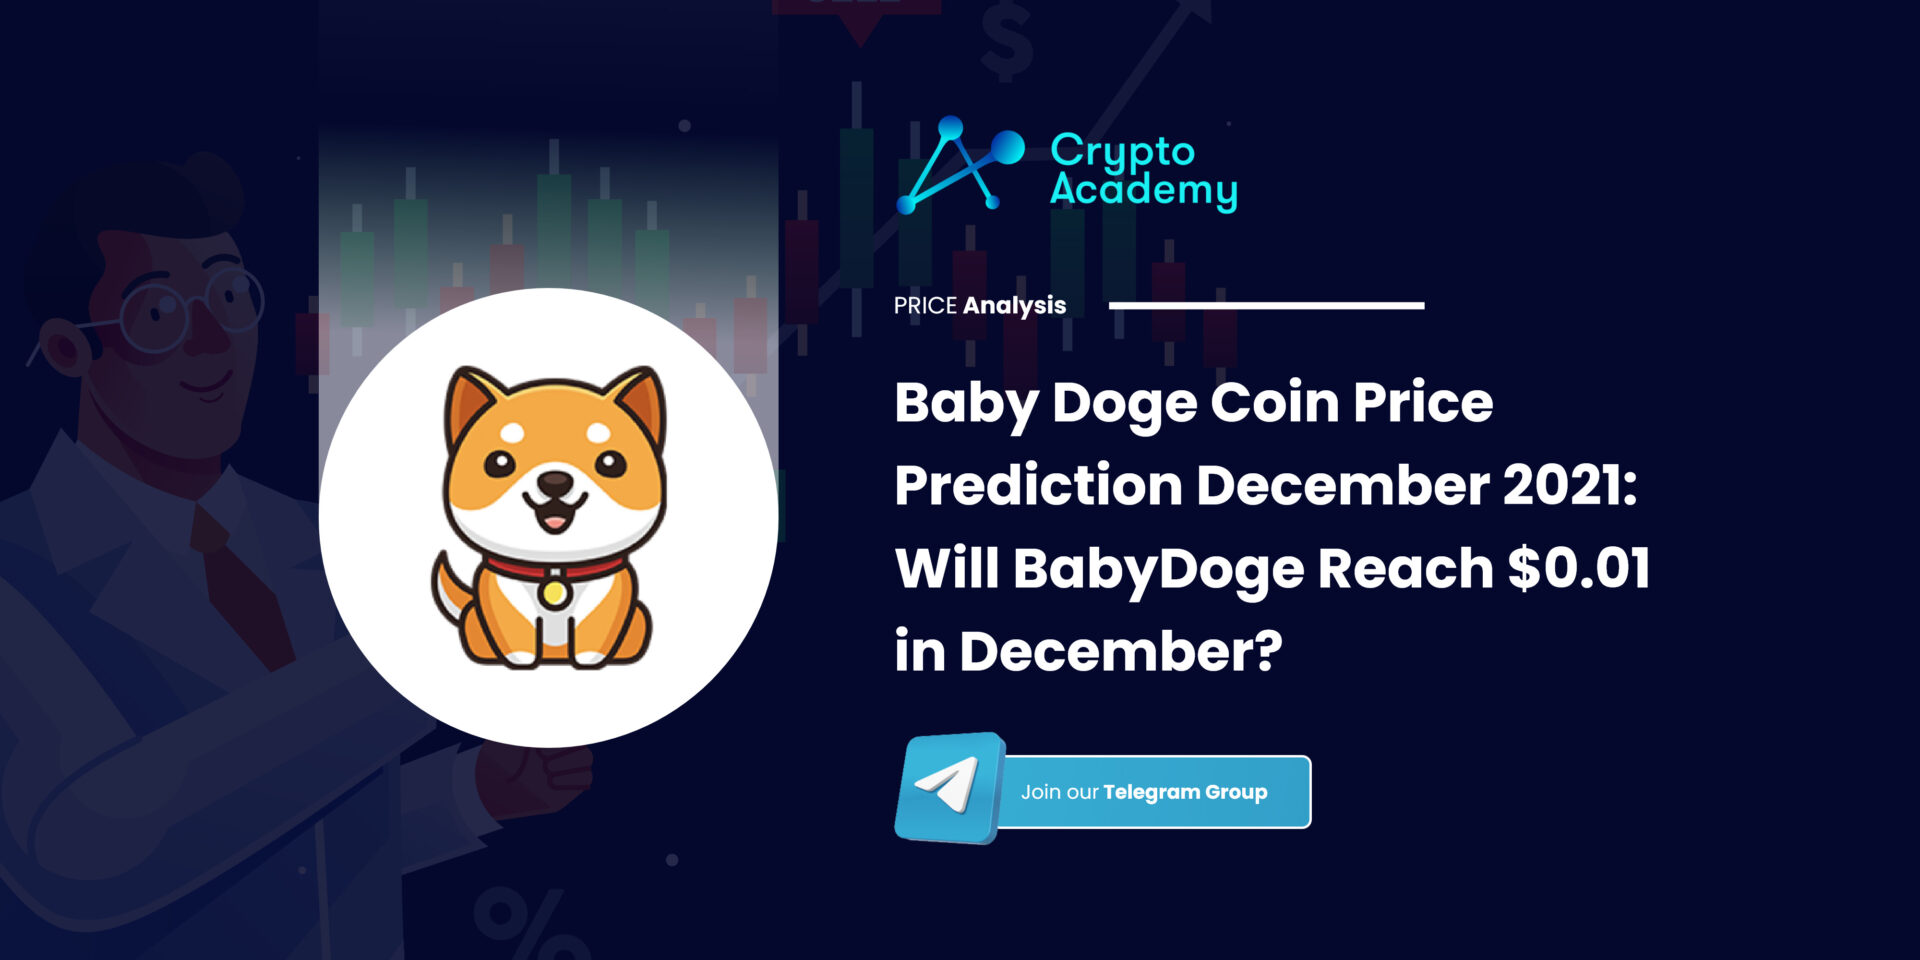 Baby Doge Coin Price Prediction December 2021: Will BabyDoge Reach $0.01 in December?